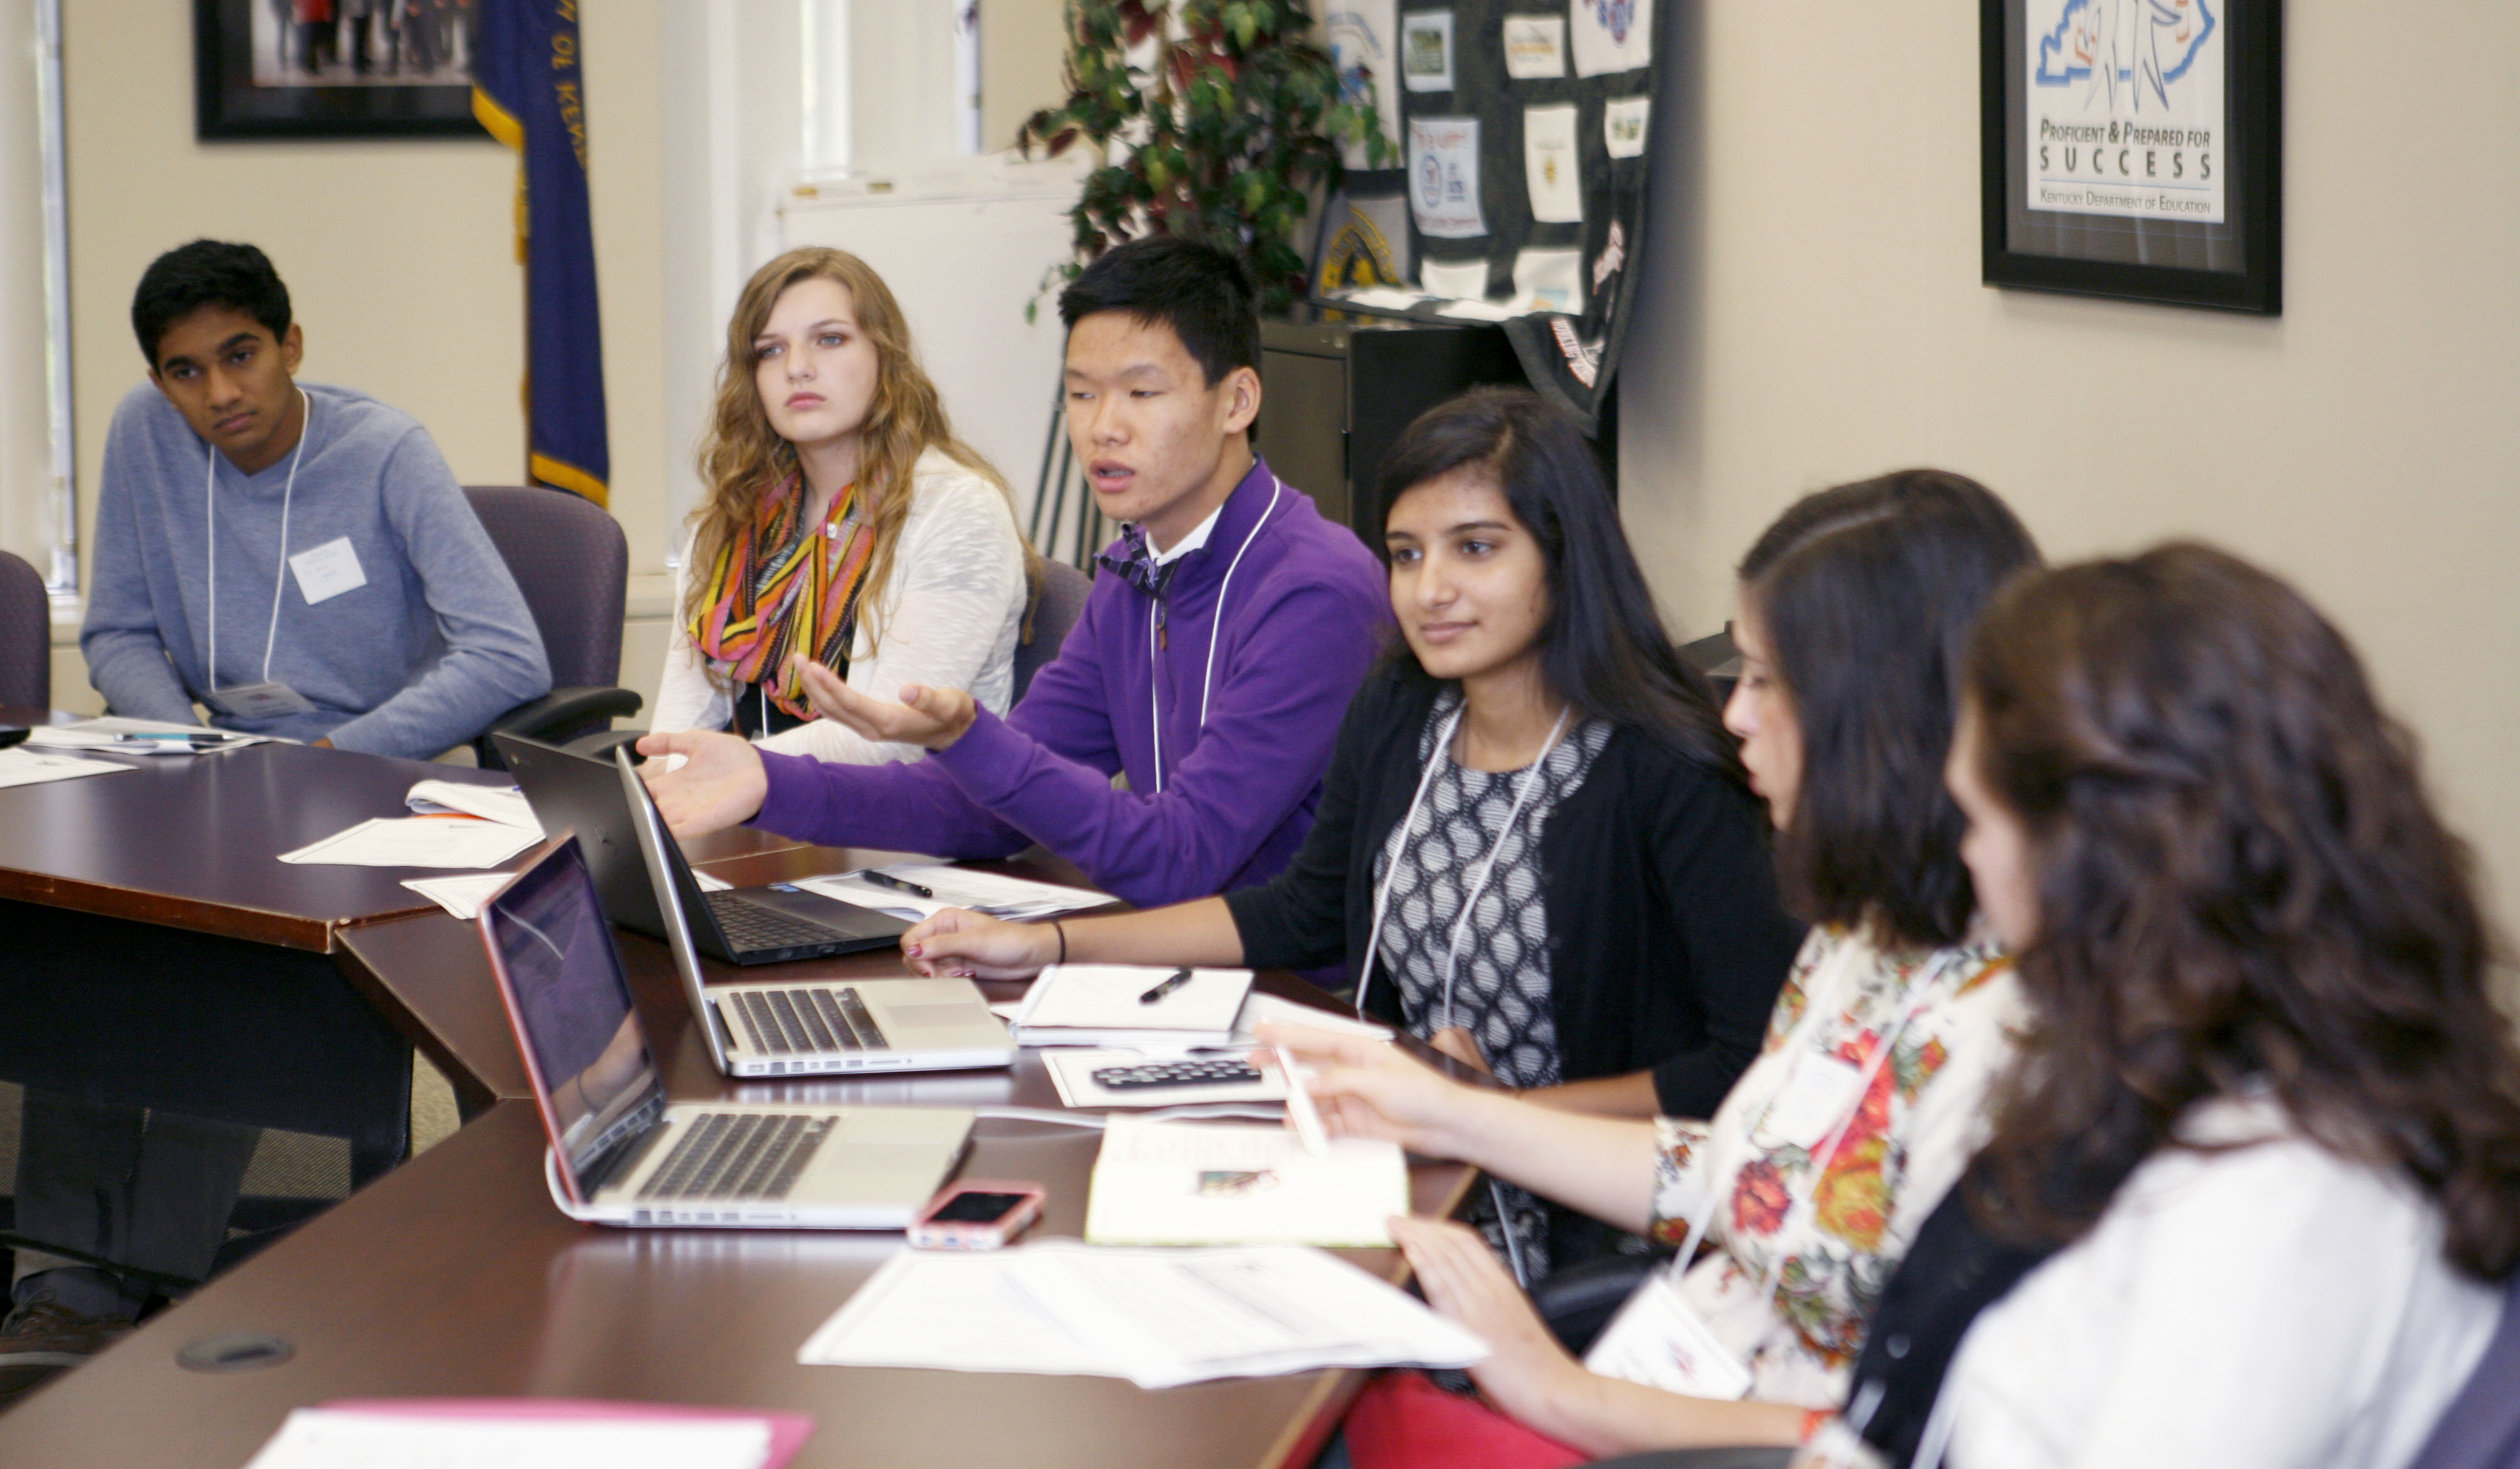 Wesley Wei, center, a junior at Boyle County High School, speaks as fellow members of the Next-Generation Student Advisory Council listen during the council’s first meeting of the 2015-16 school year at the Capital Plaza Tower in Frankfort. Also pictured are Amrit Avula of Bowling Green High School (Bowling Green Independent), Kaeli Riggs of Seneca High School (Jefferson County), Roop Patel of Beechwood High School (Beechwood Independent), Emily Salamanca of Henry Clay High School (Fayette County) and Kenzy Moore of Russell High School (Russell Independent). Photo by Mike Marsee, Nov. 5, 2015